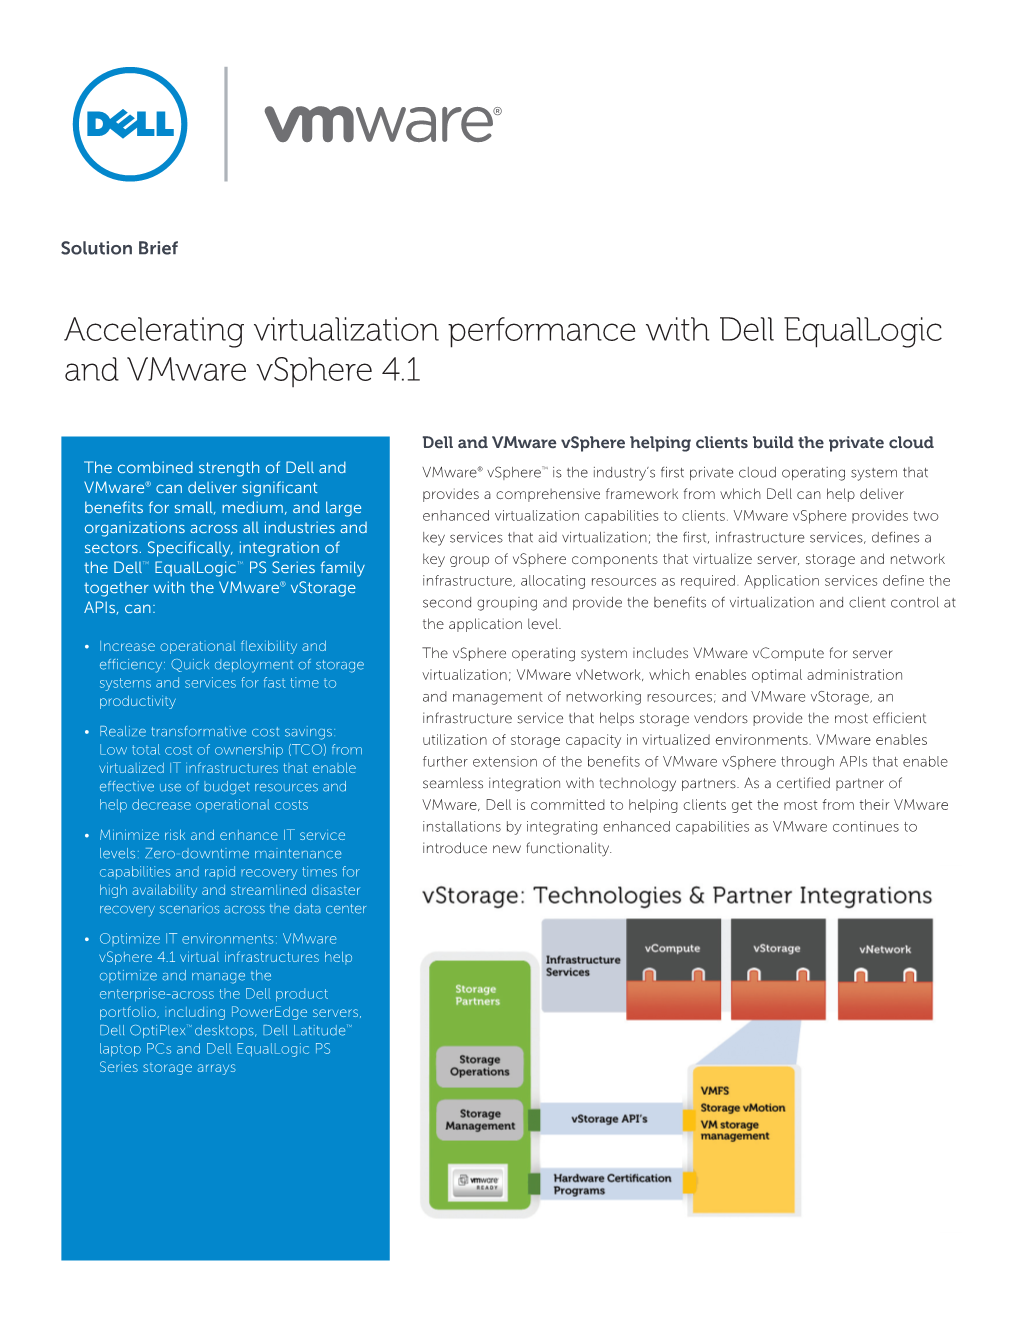 Accelerating Virtualization Performance with Dell Equallogic and Vmware Vsphere 4.1